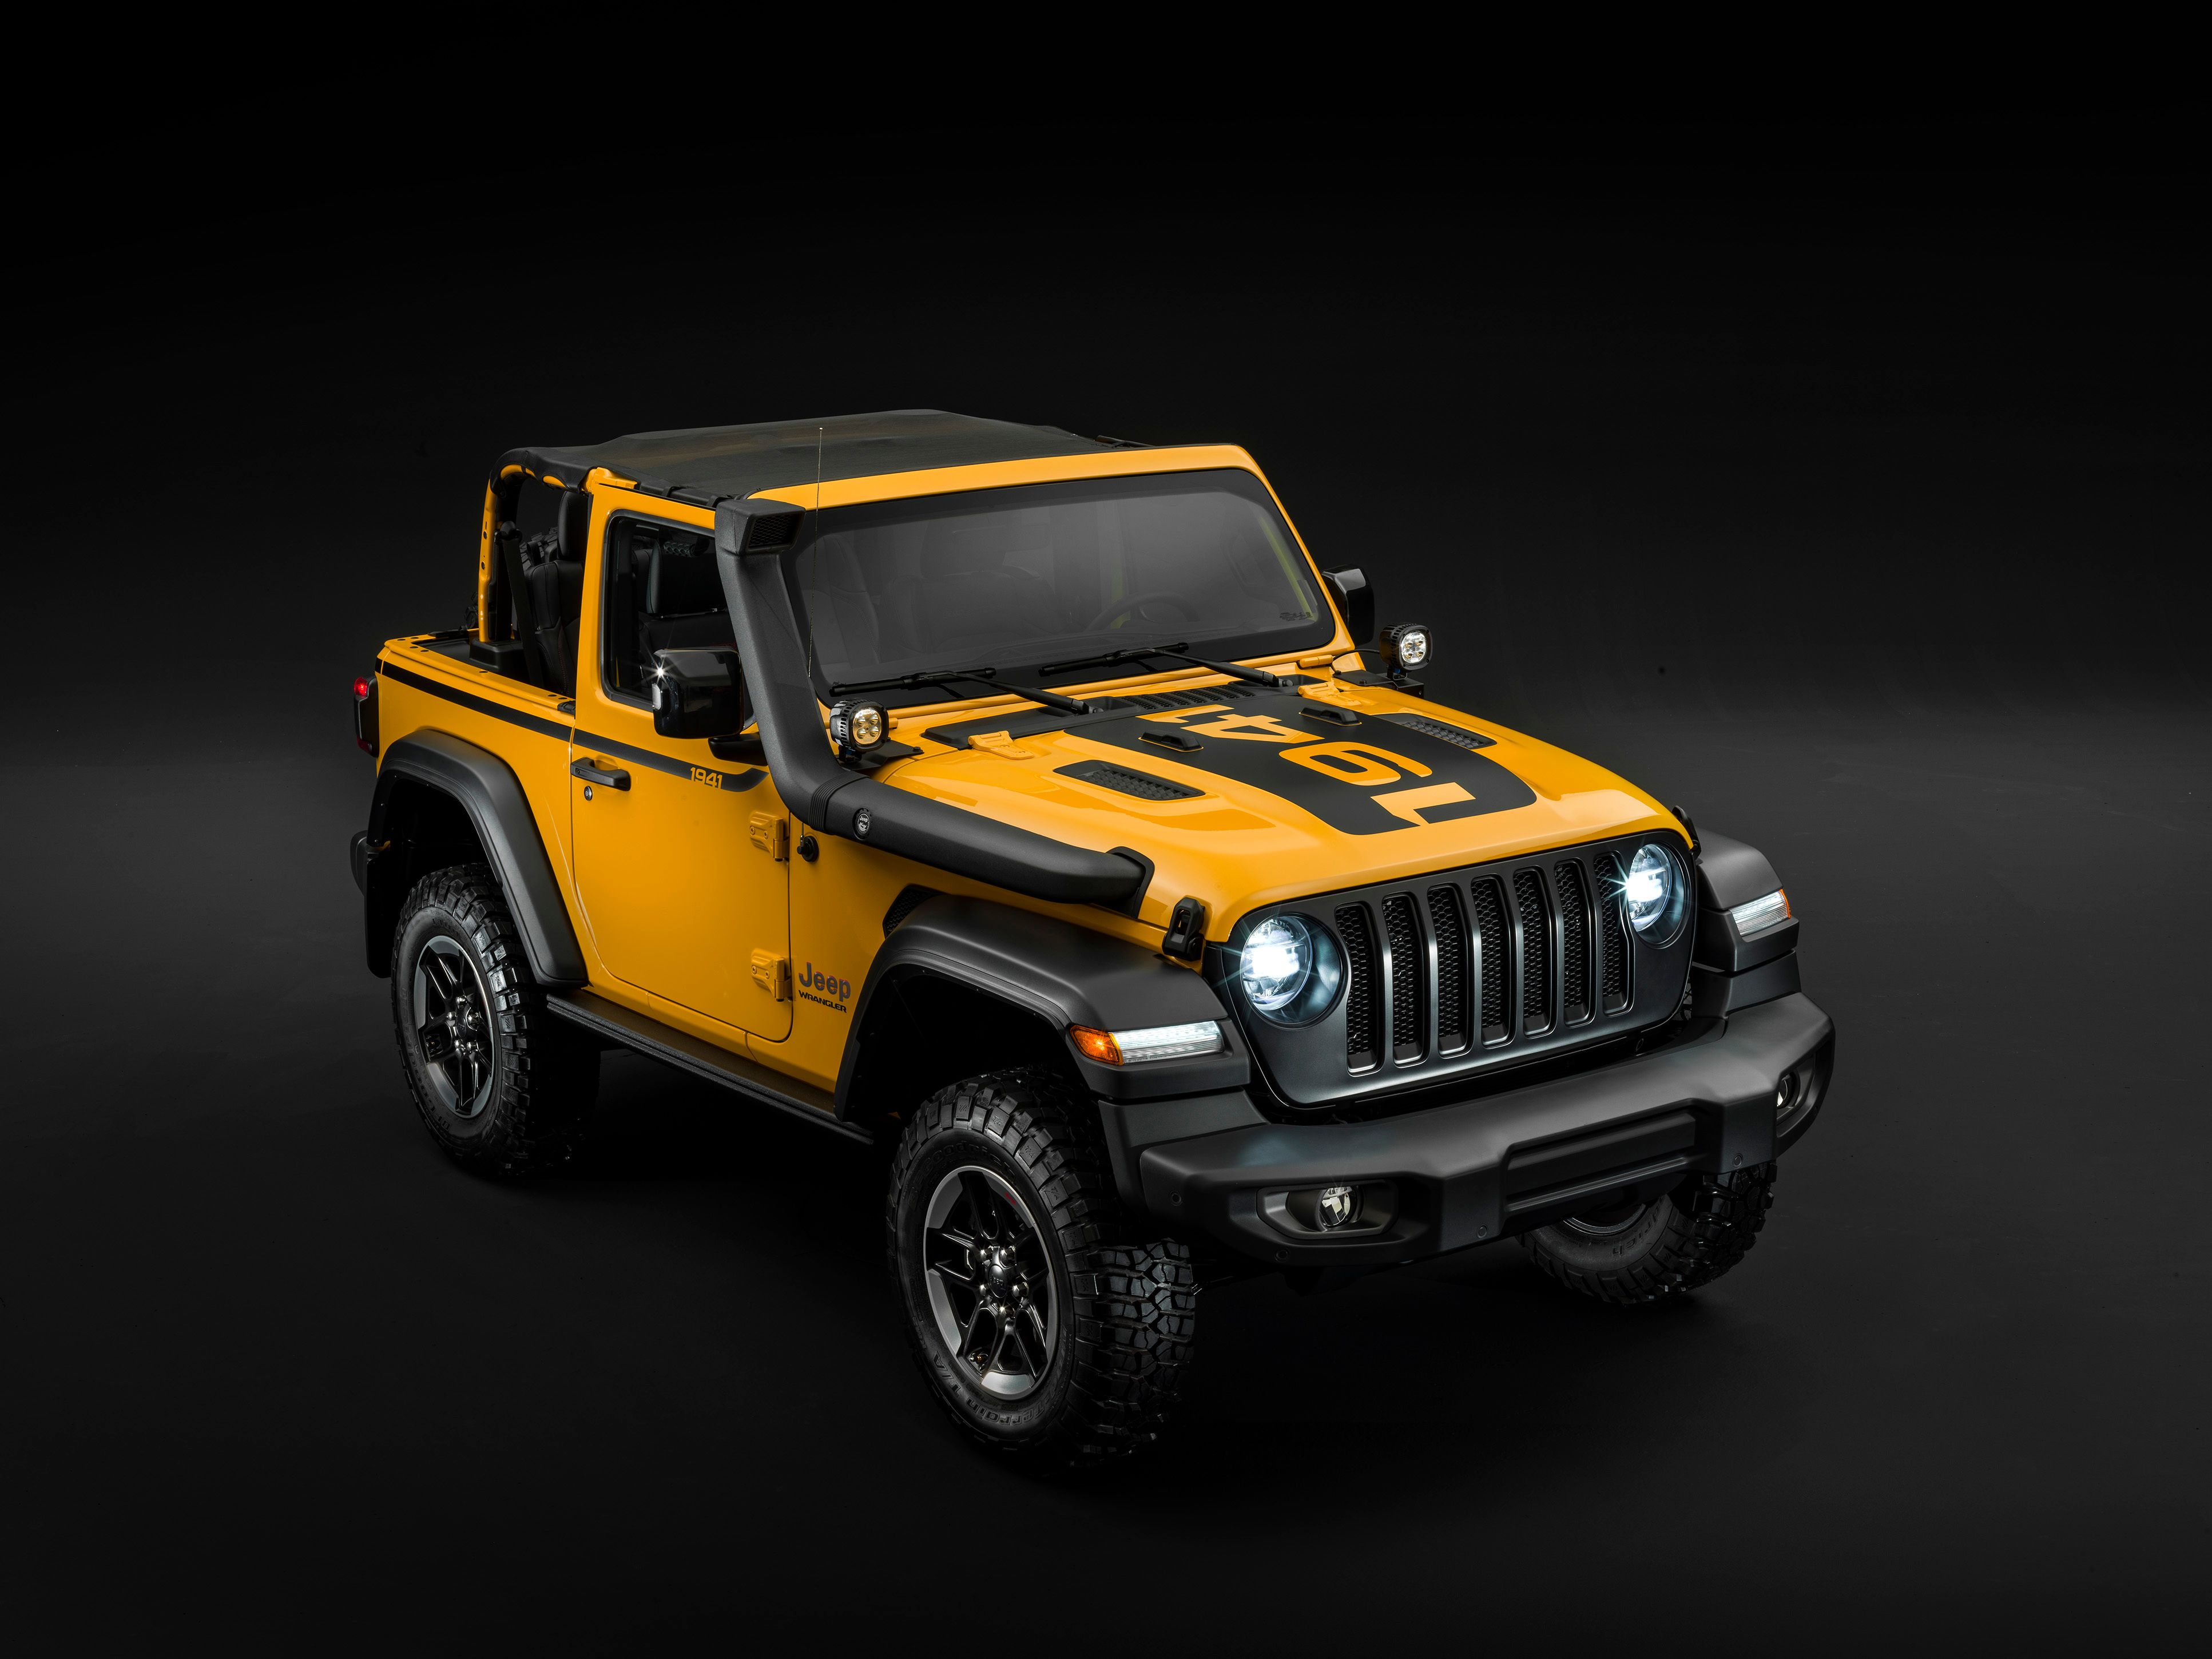 2018 The 2019 Jeep Wrangler Rubicon 1941 is the Only Outdoor Companion You'll Need During Your European Adventures